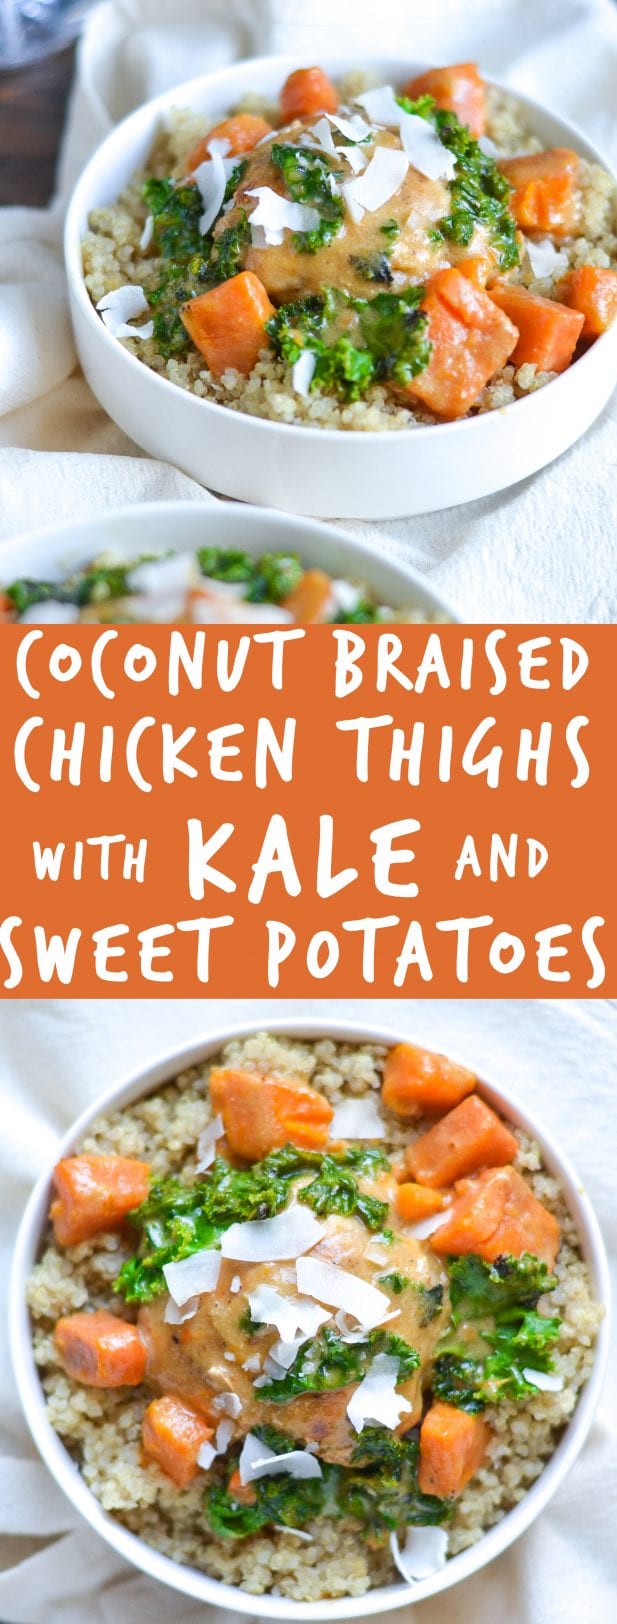 Coconut Braised Chicken Thighs with Kale and Sweet Potatoes